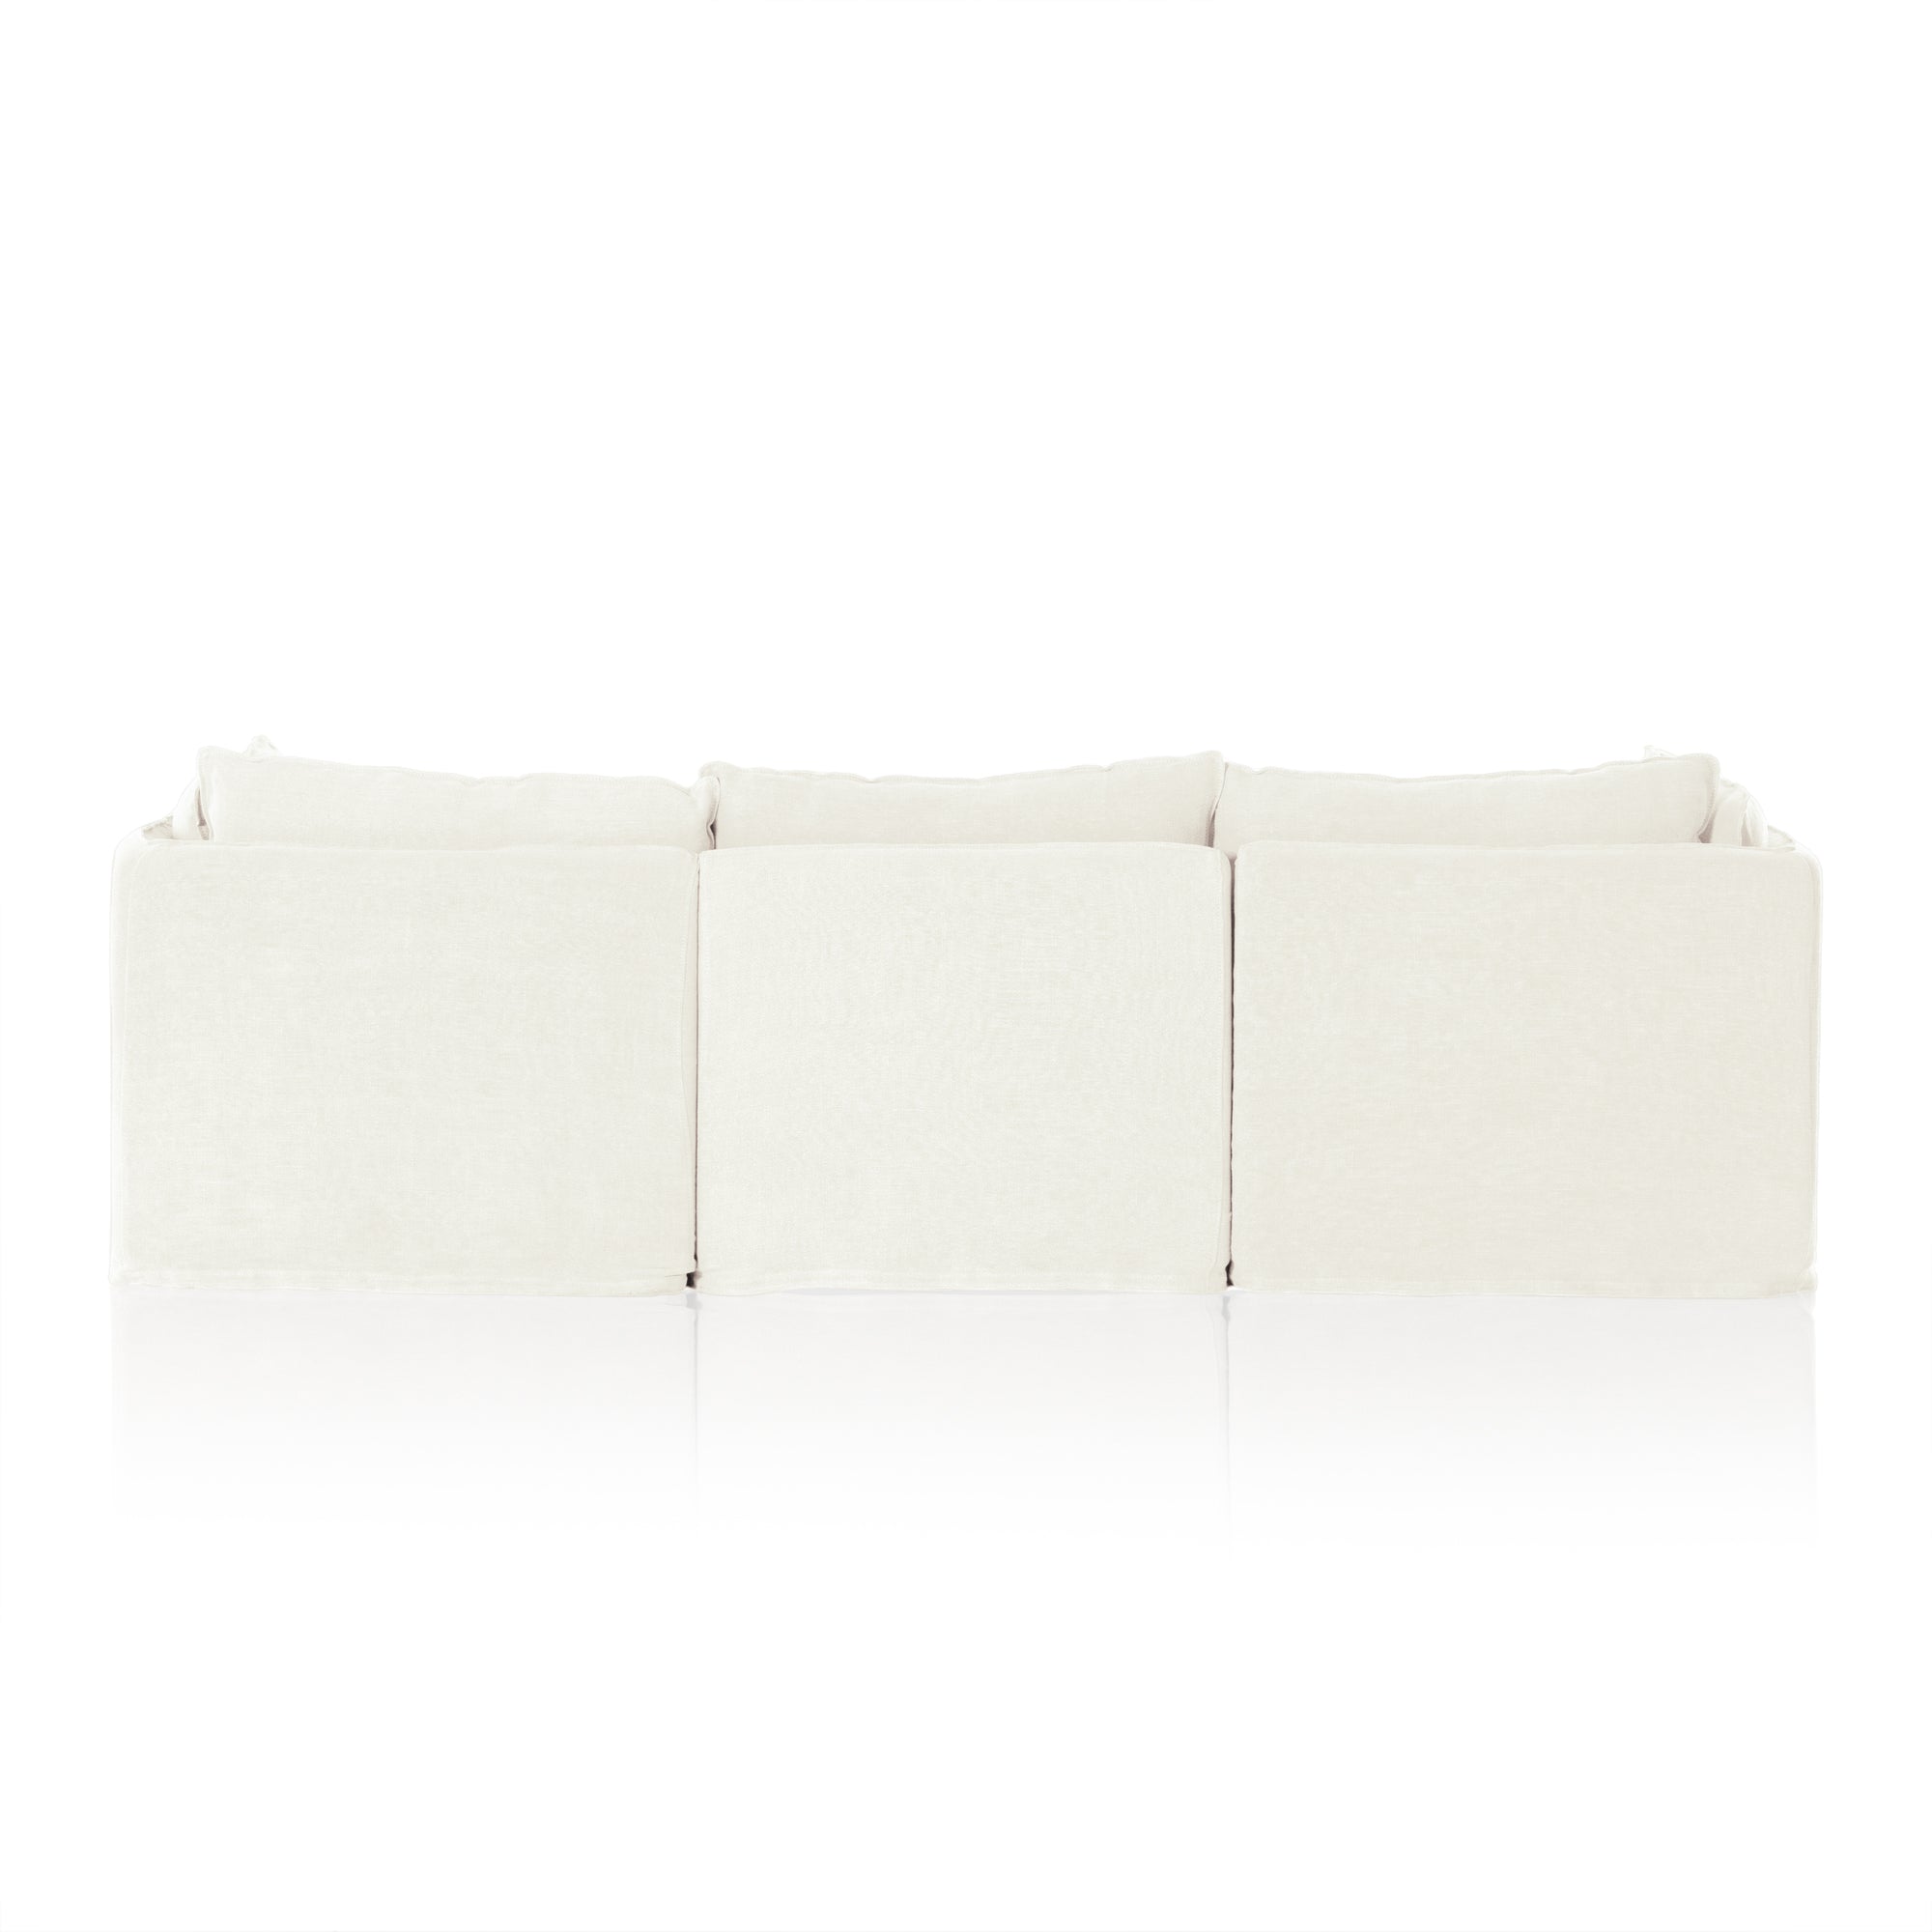 Andre Slipcover 3-piece Sectional W/ Ottoman